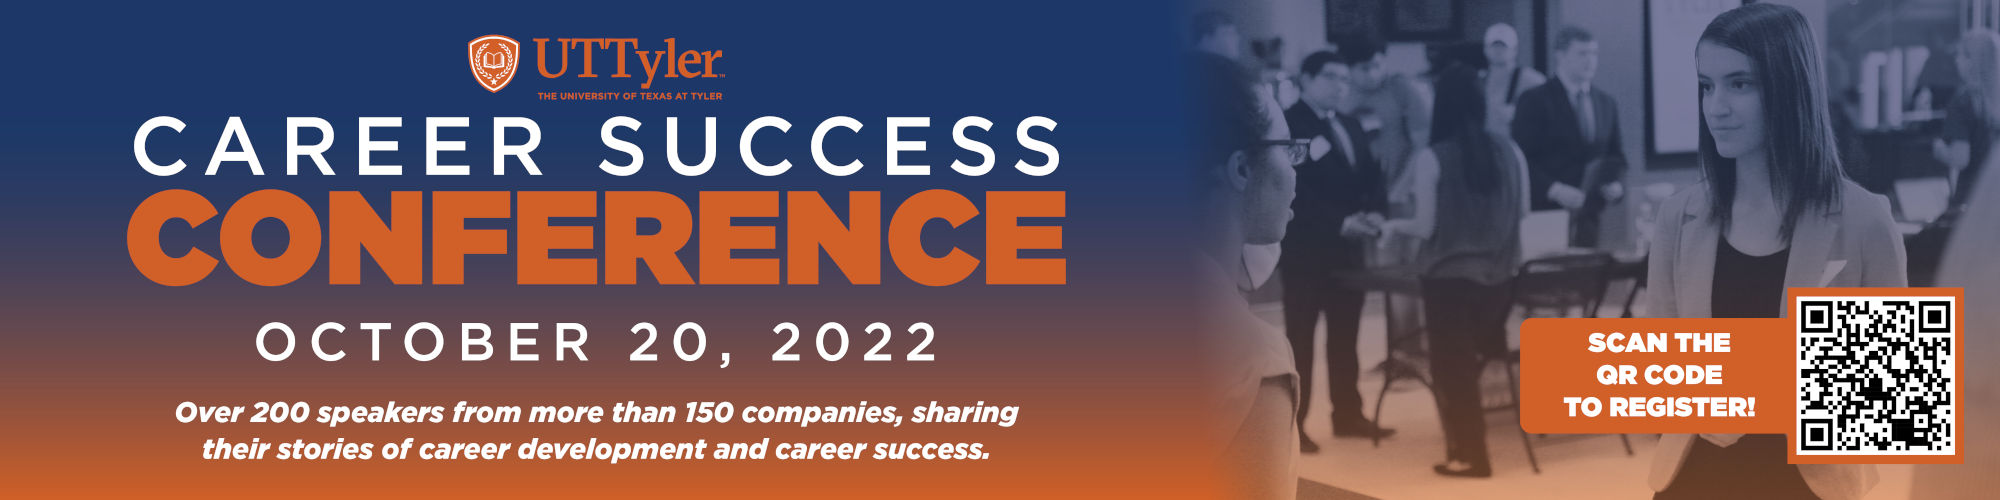 Career Success Conference 2022